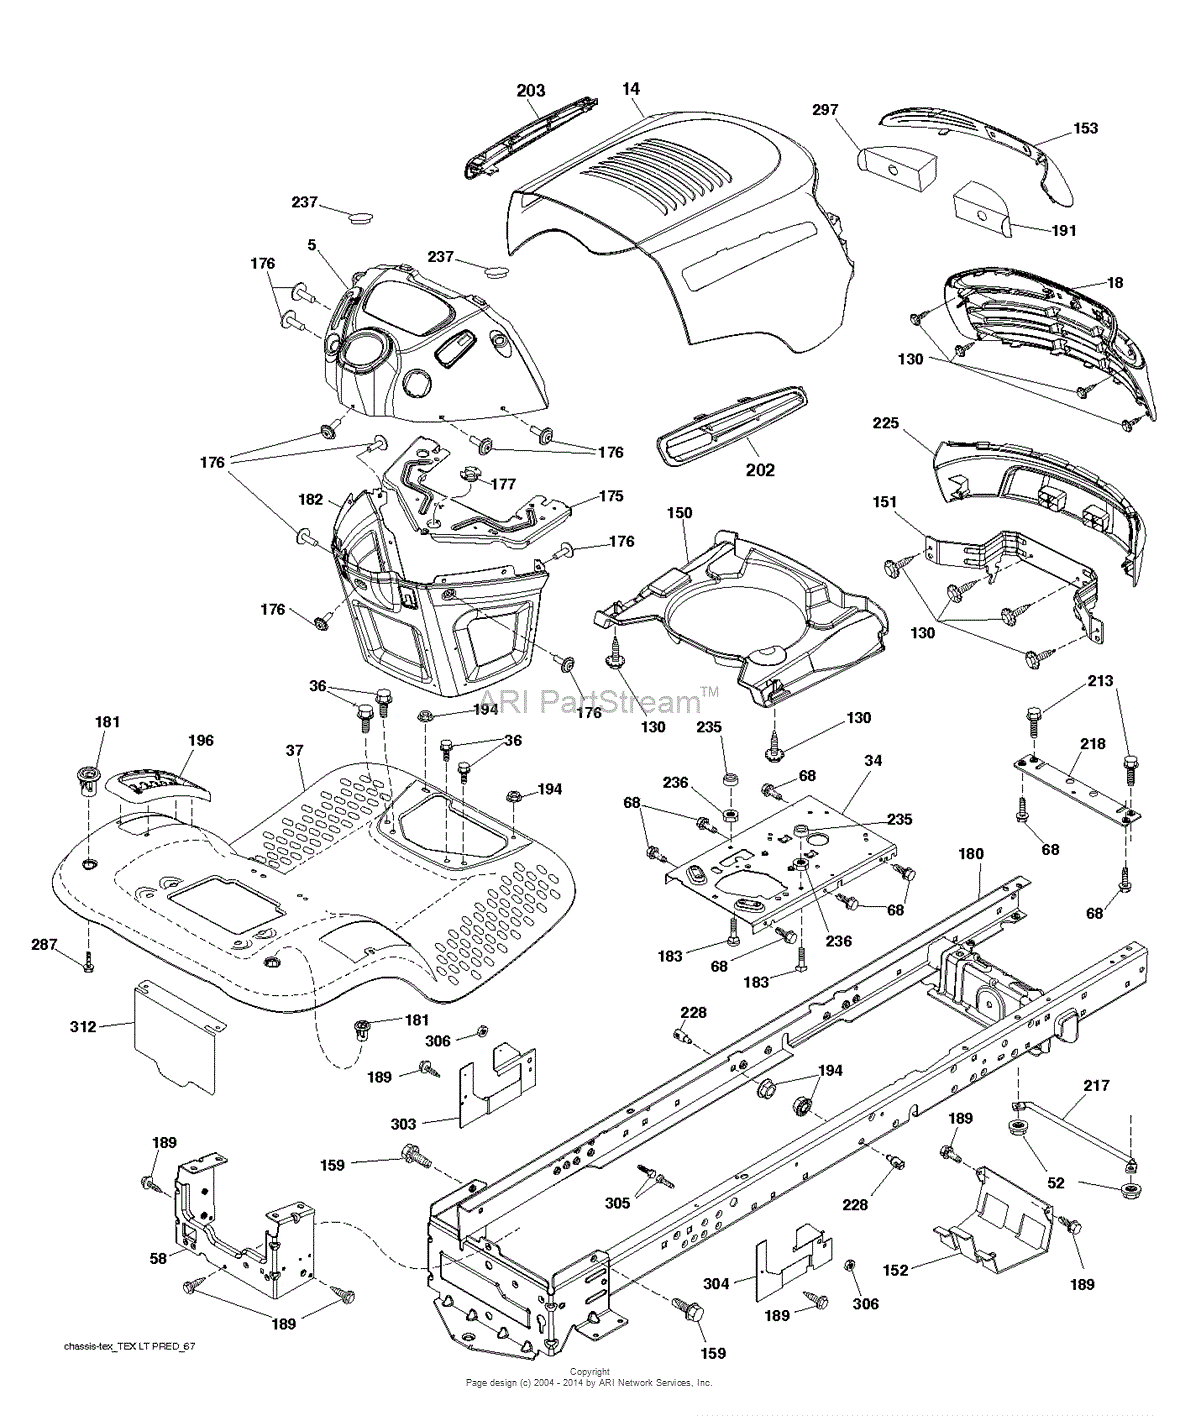 AYP/Electrolux LT2216 - 96041010206 (2012-08) Parts Diagram for CHASSIS ...